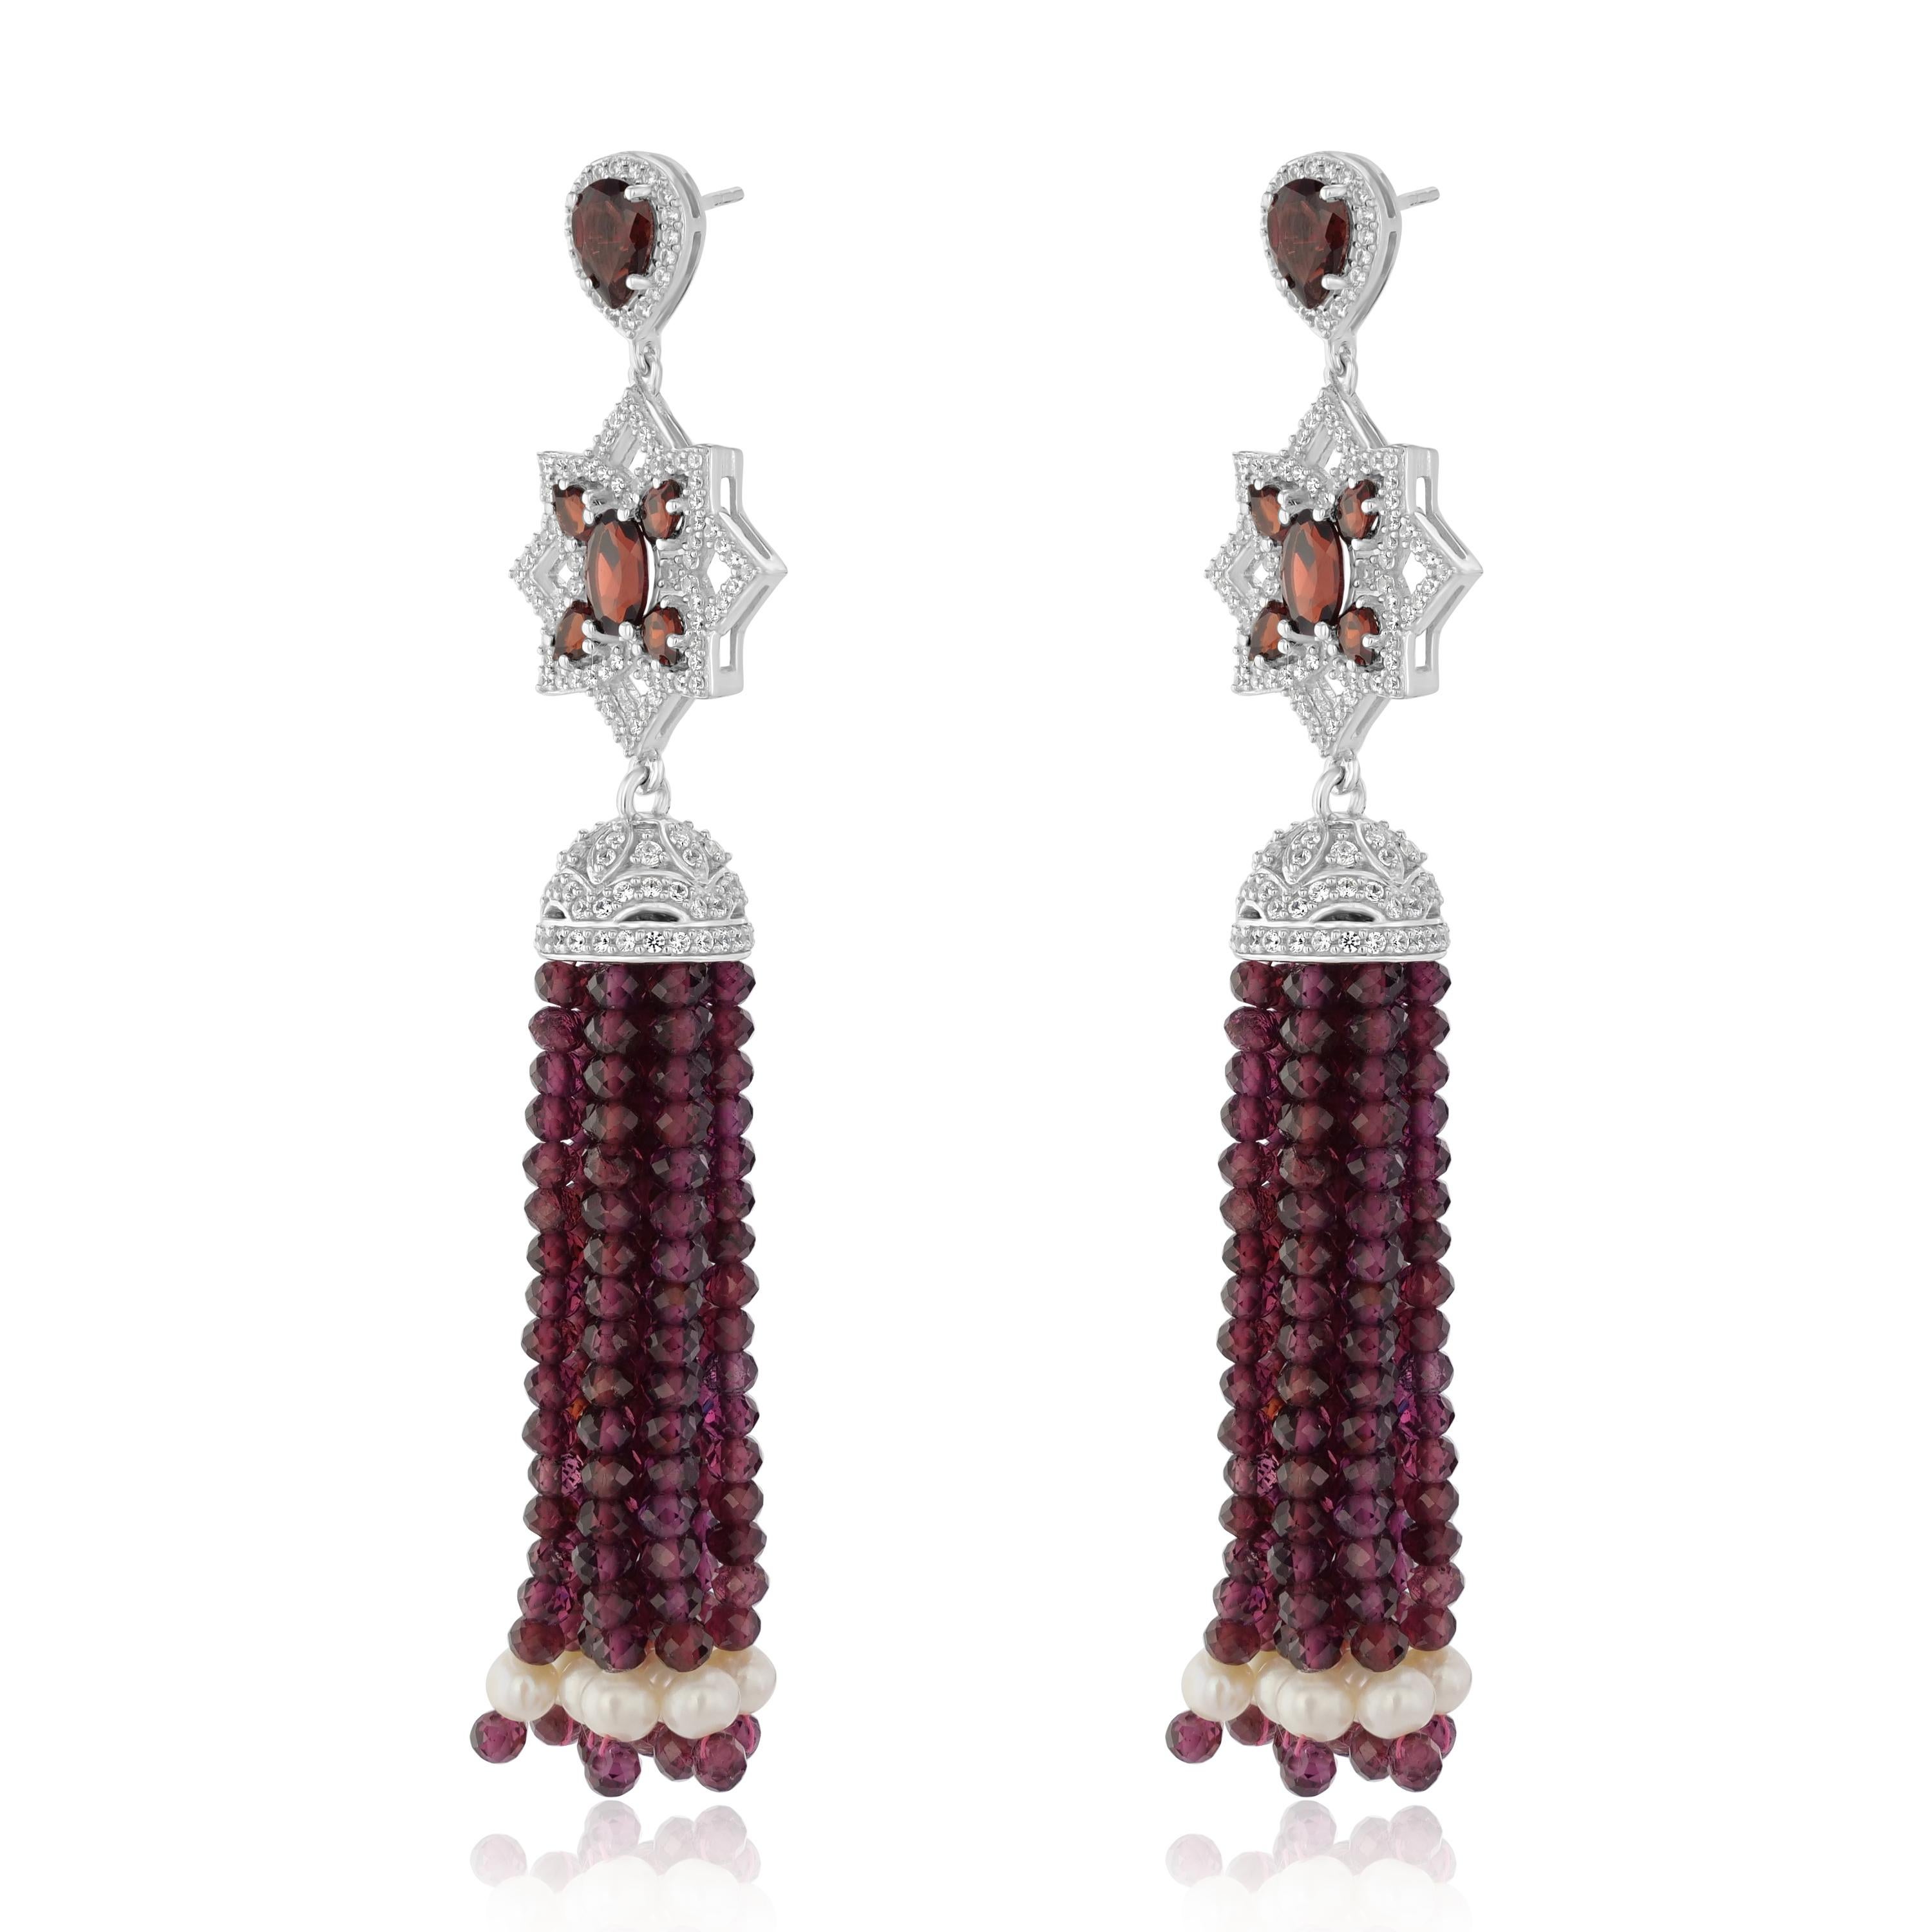 Garnet, White Natural Zircon And Freshwater Pearl Tassel Earring In Sterling Silver. A magnificent fusion of garnet beads and freshwater pearls accompanied by white natural zircon make these women's tassel earrings. Crafted in genuine and nickel